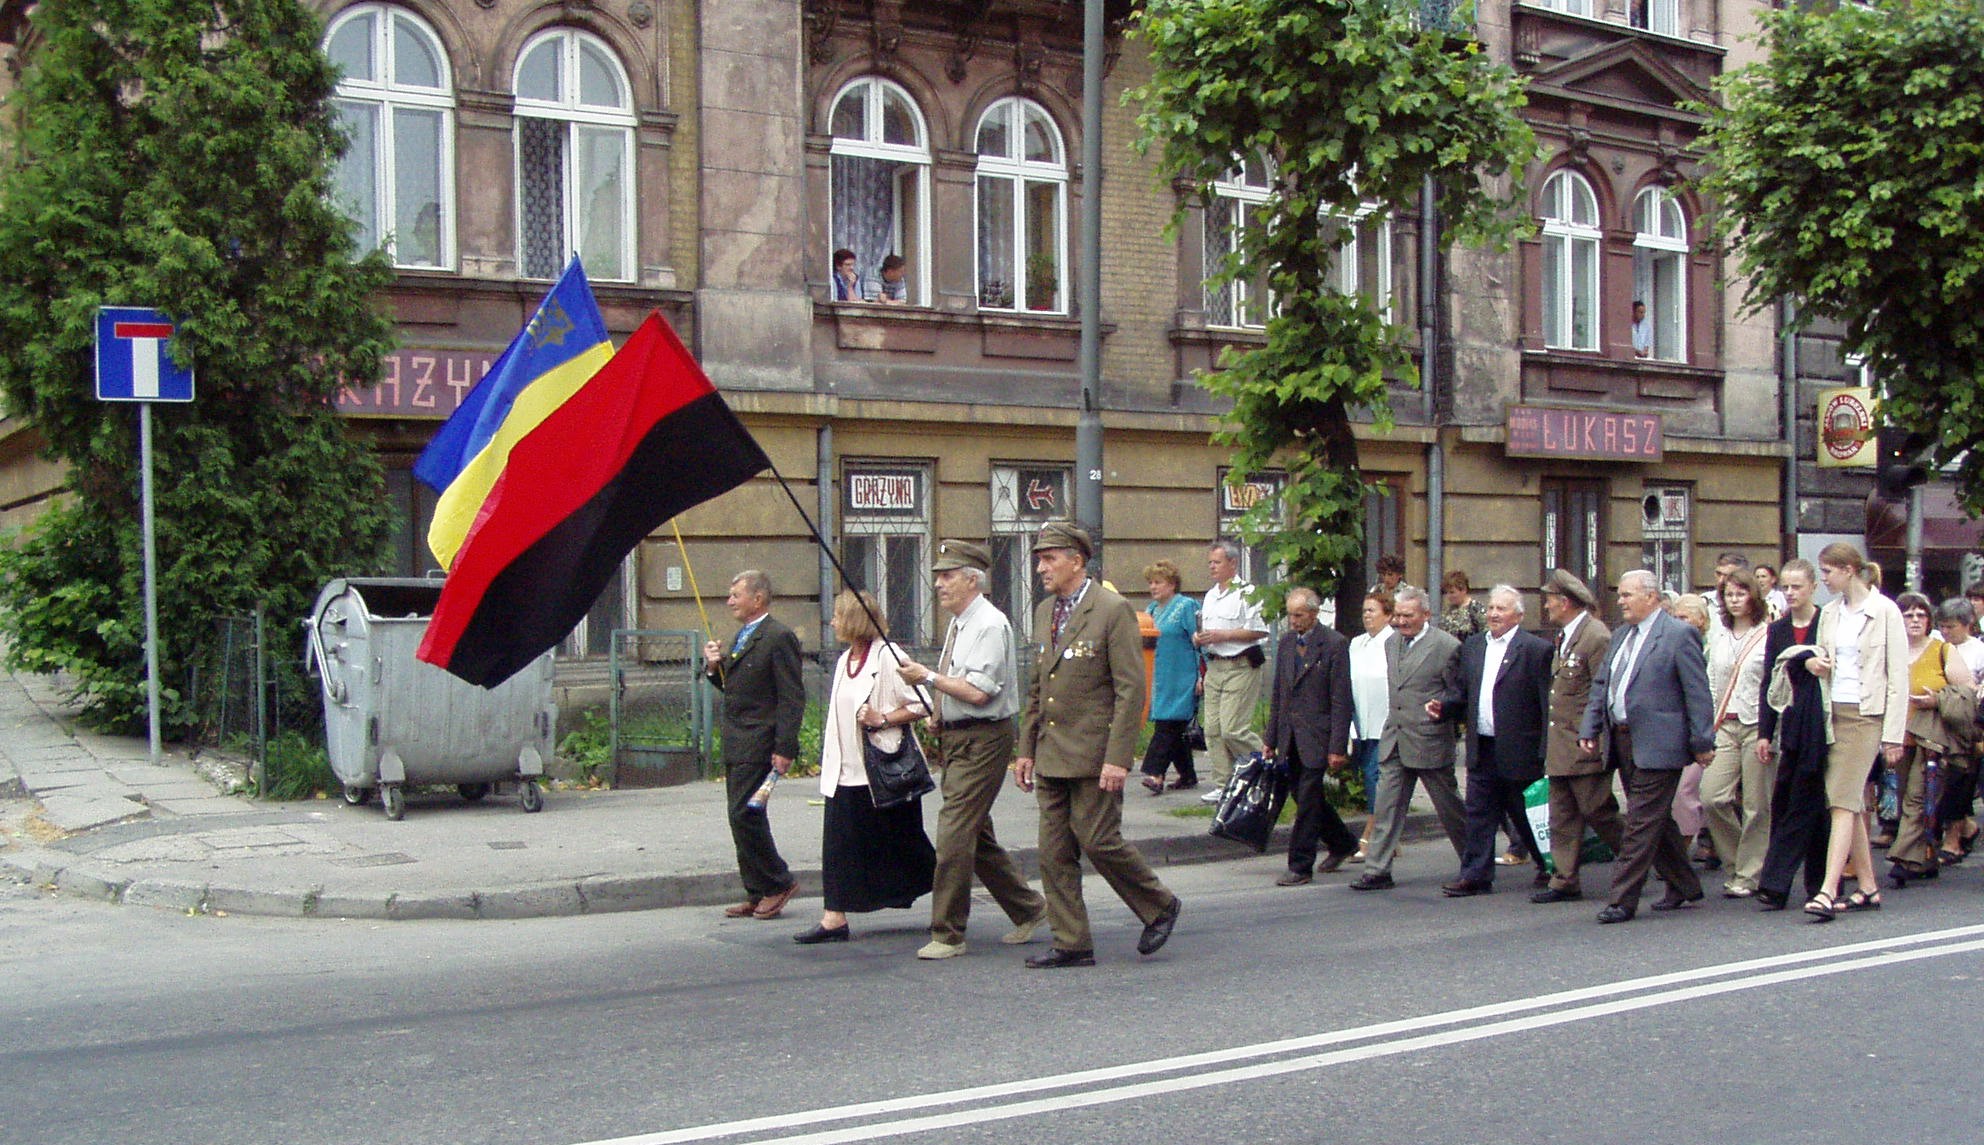 Veterans of the Ukrainian Insurgent Army, an anti-communist paramilitary group, march through Przemyśl, Poland in 2007.